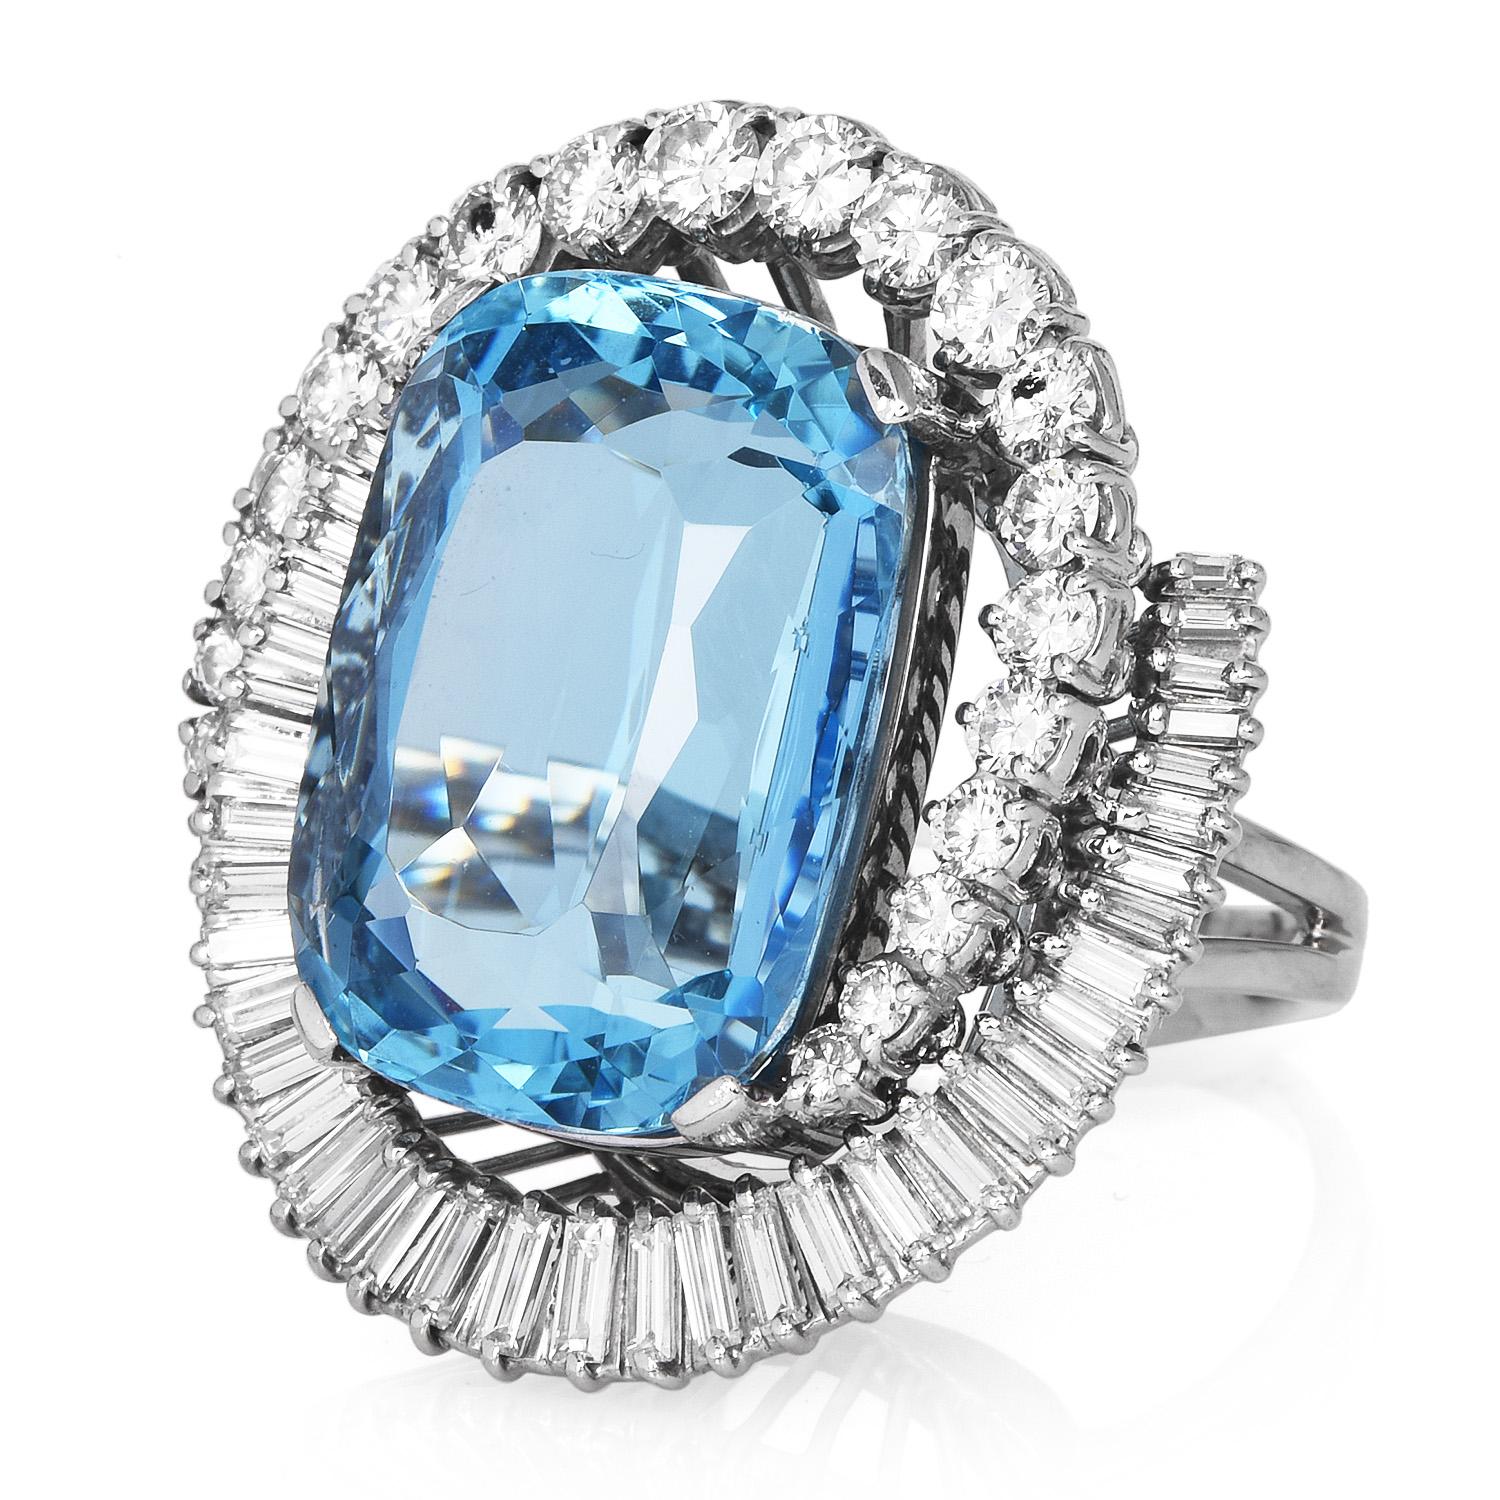 A look into a wave in the bluest ocean! A striking, appx. 23.07-carat Cushion cut Aquamarine H-Sten ring with GIA lab Report adorns the center of this incredibly mesmerizing ring.

The vintage H Stern bypass halo design of the diamonds creates